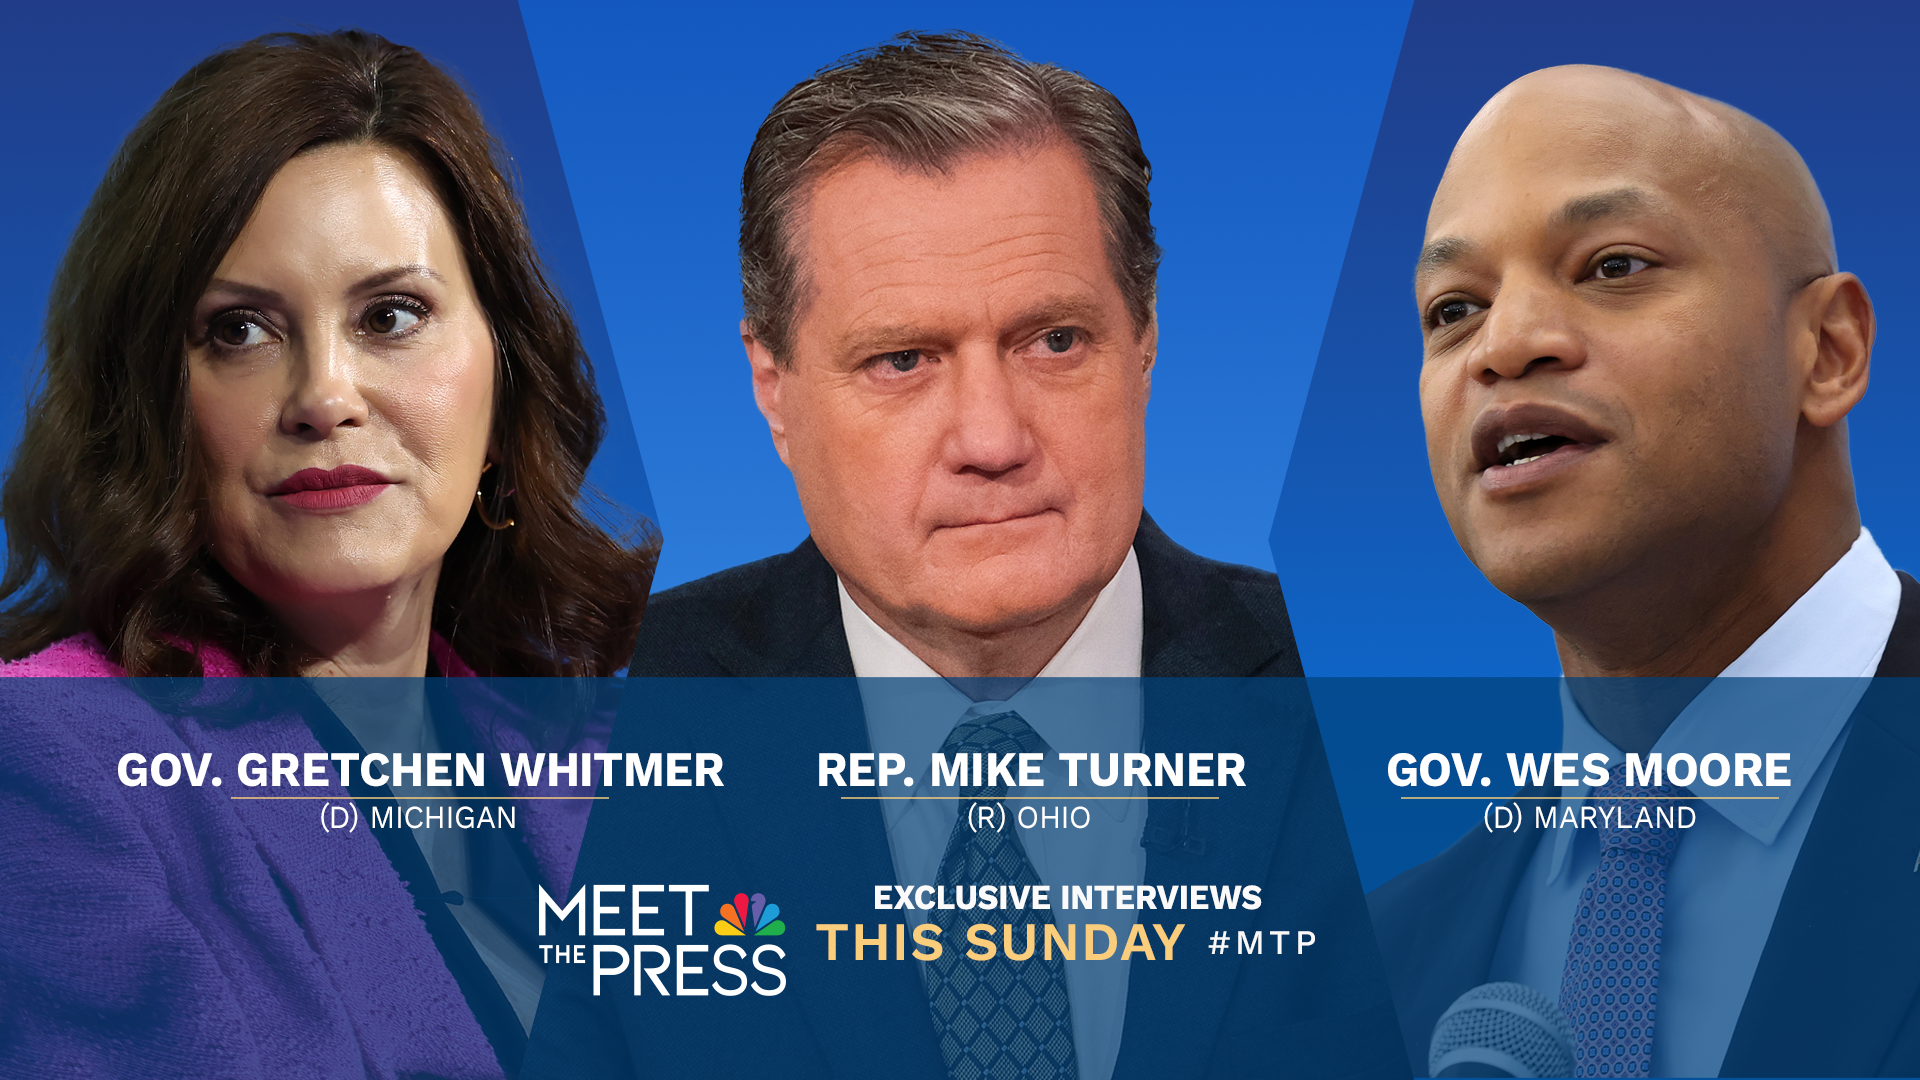 EXCLUSIVE INTERVIEWS WITH MICHIGAN GOV. GRETCHEN WHITMER & REP. MIKE TURNER THIS SUNDAY ON “MEET THE PRESS WITH KRISTEN WELKER”